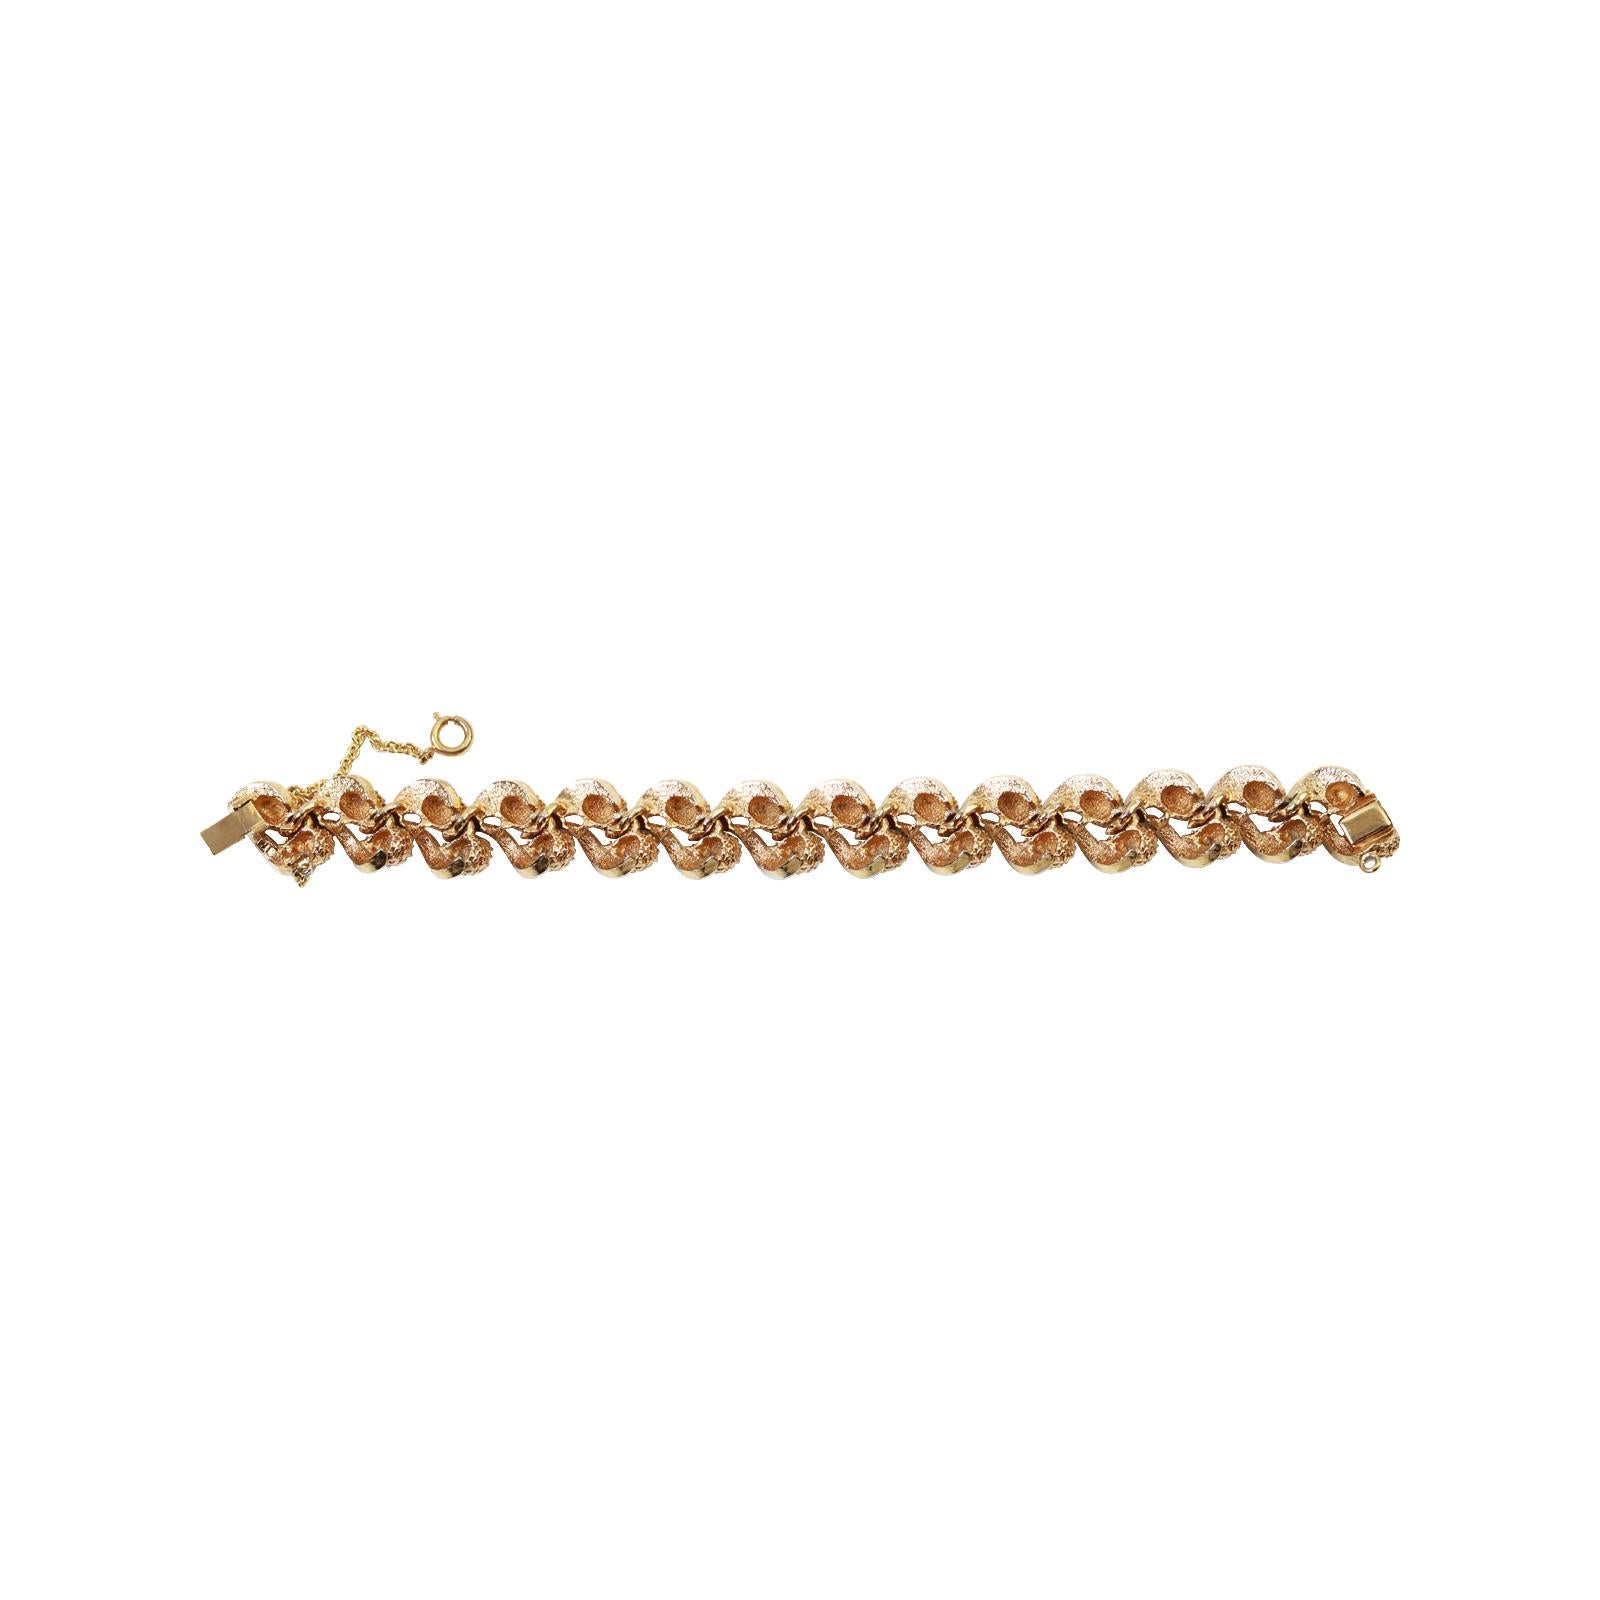 Modern Vintage Panetta Gold Braided Bracelet with Clear Pave Stones Circa 1960s For Sale